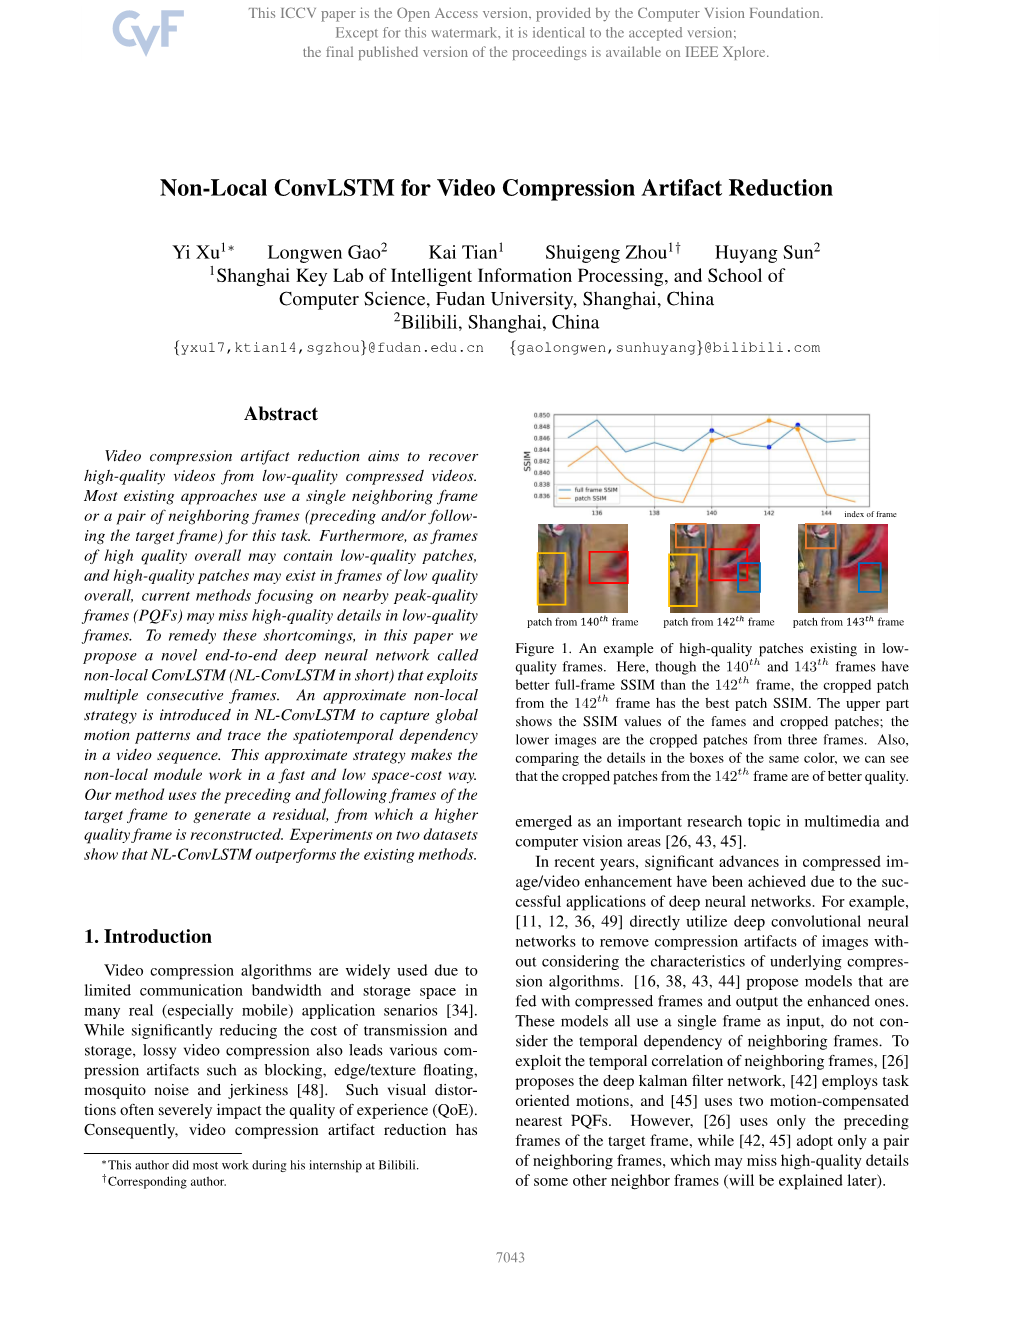 Non-Local Convlstm for Video Compression Artifact Reduction